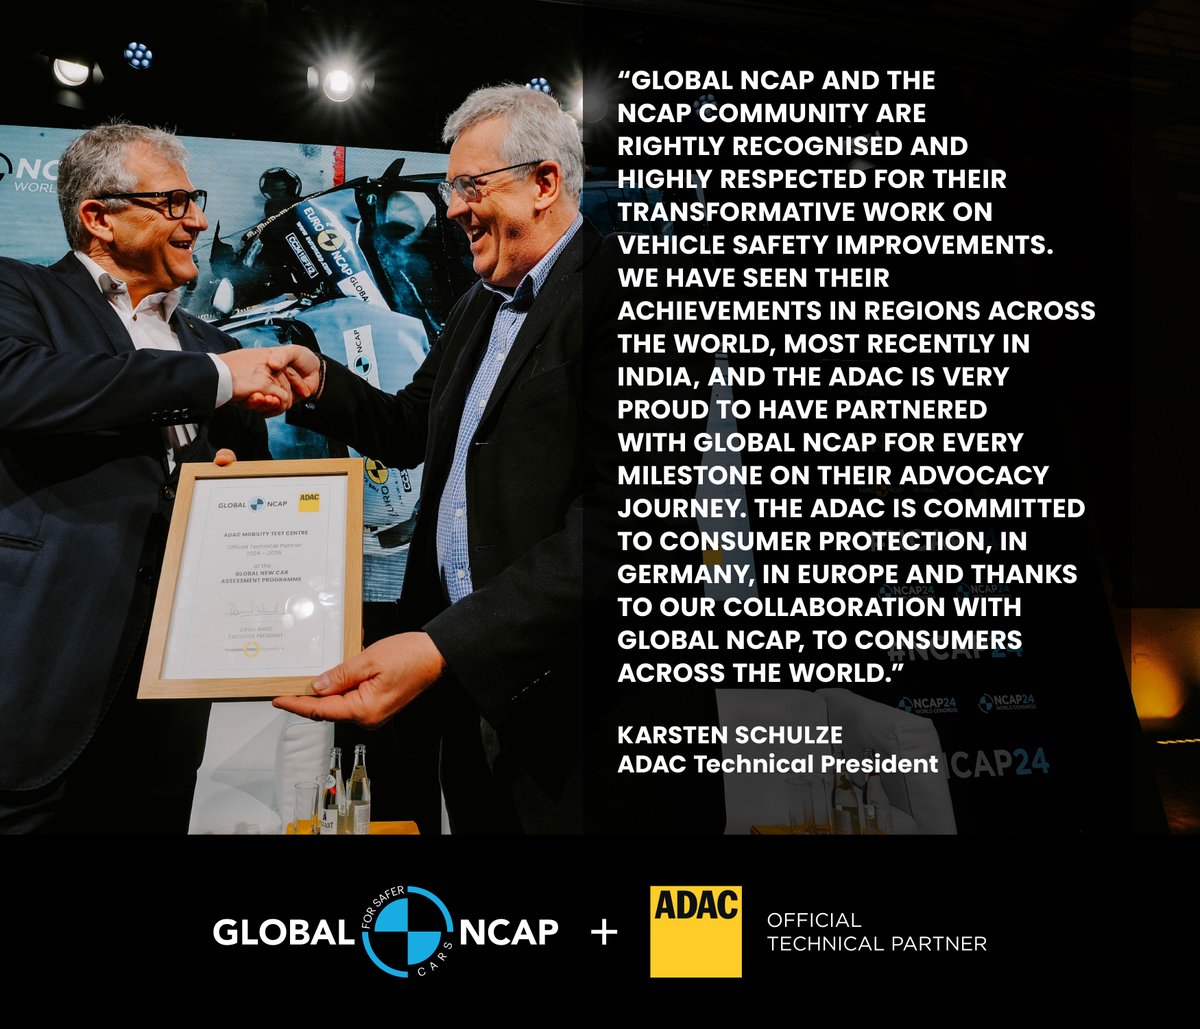 'The ADAC is committed to consumer protection, in Germany, in Europe and thanks to our collaboration with Global NCAP, to consumers across the world.' Karsten Schulze, @ADAC Technical President bit.ly/4b8tnYP #NCAP24 #ForSaferJourneys